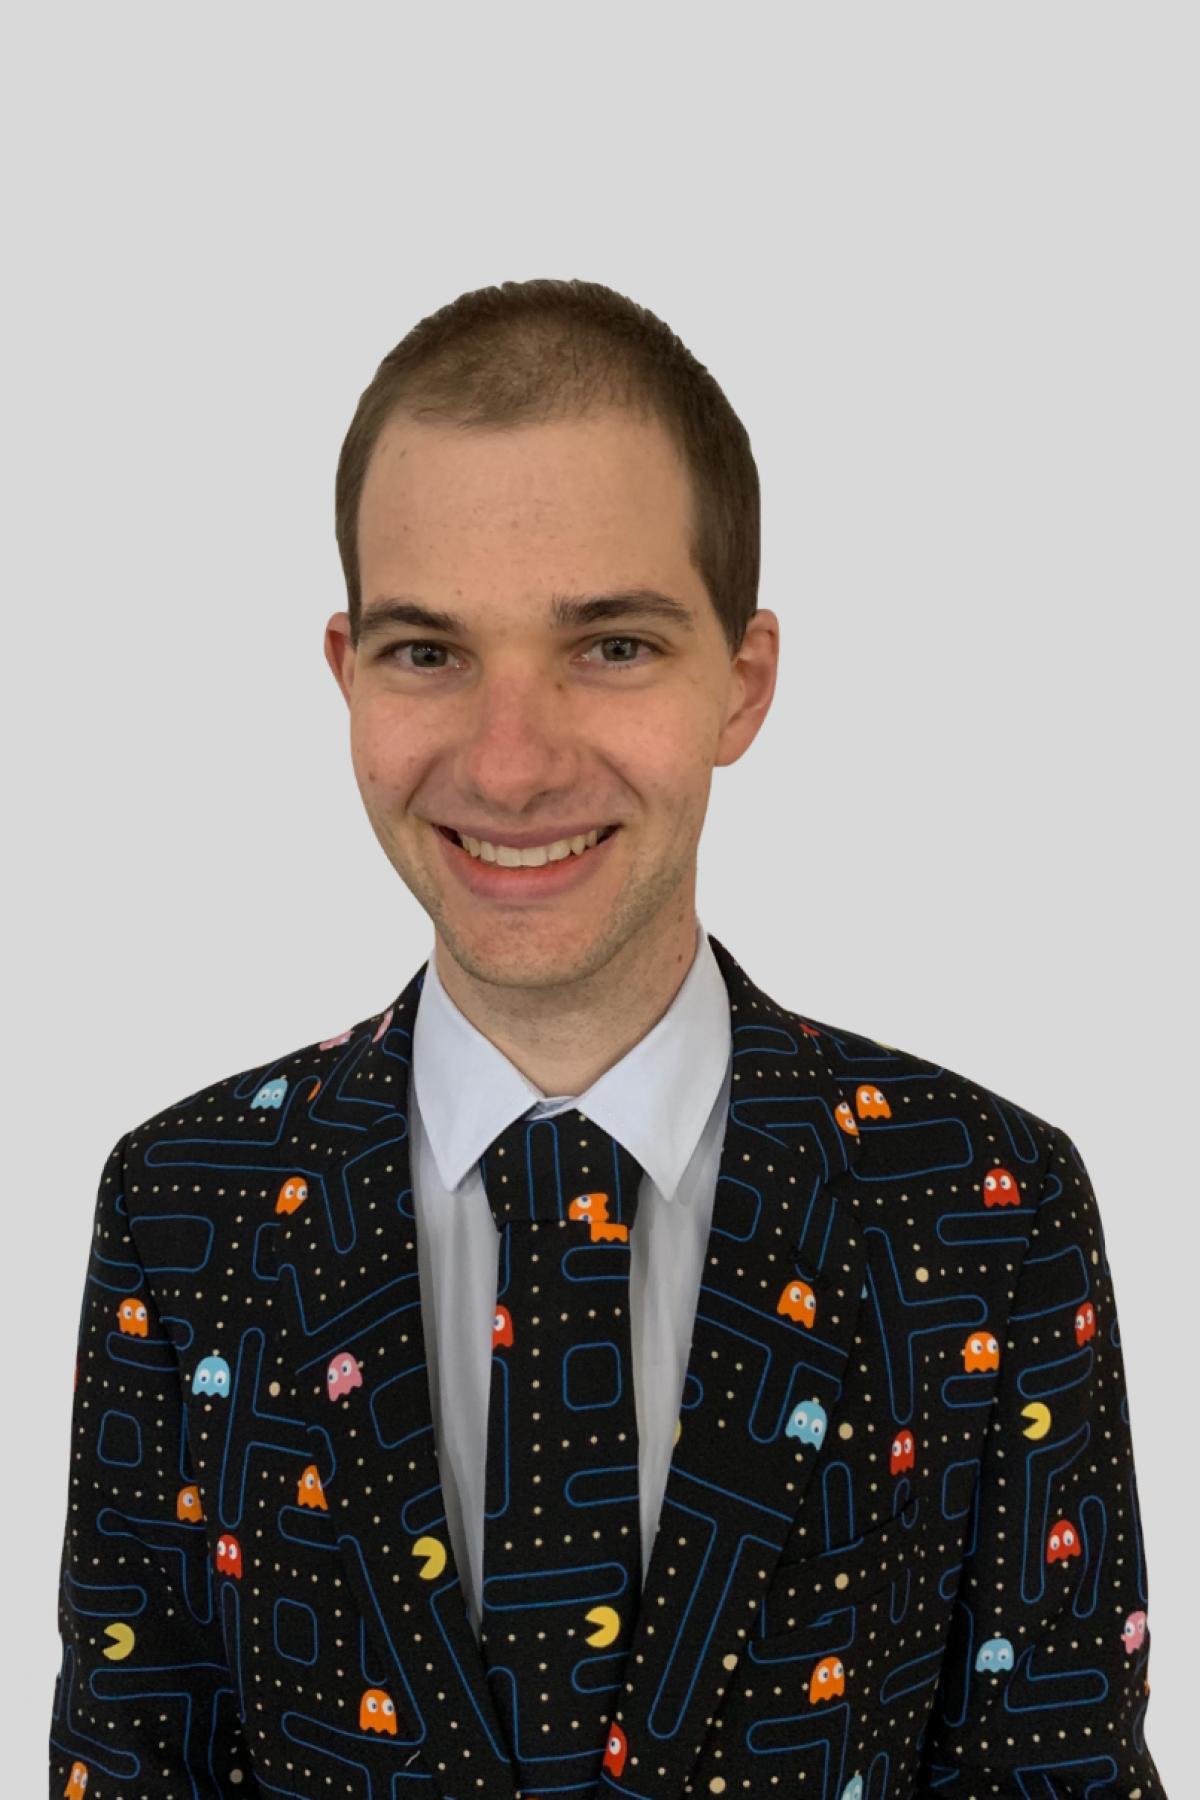 Andrew Pfeiffer's headshot. He's wearing a pac man suit and smiling widely.